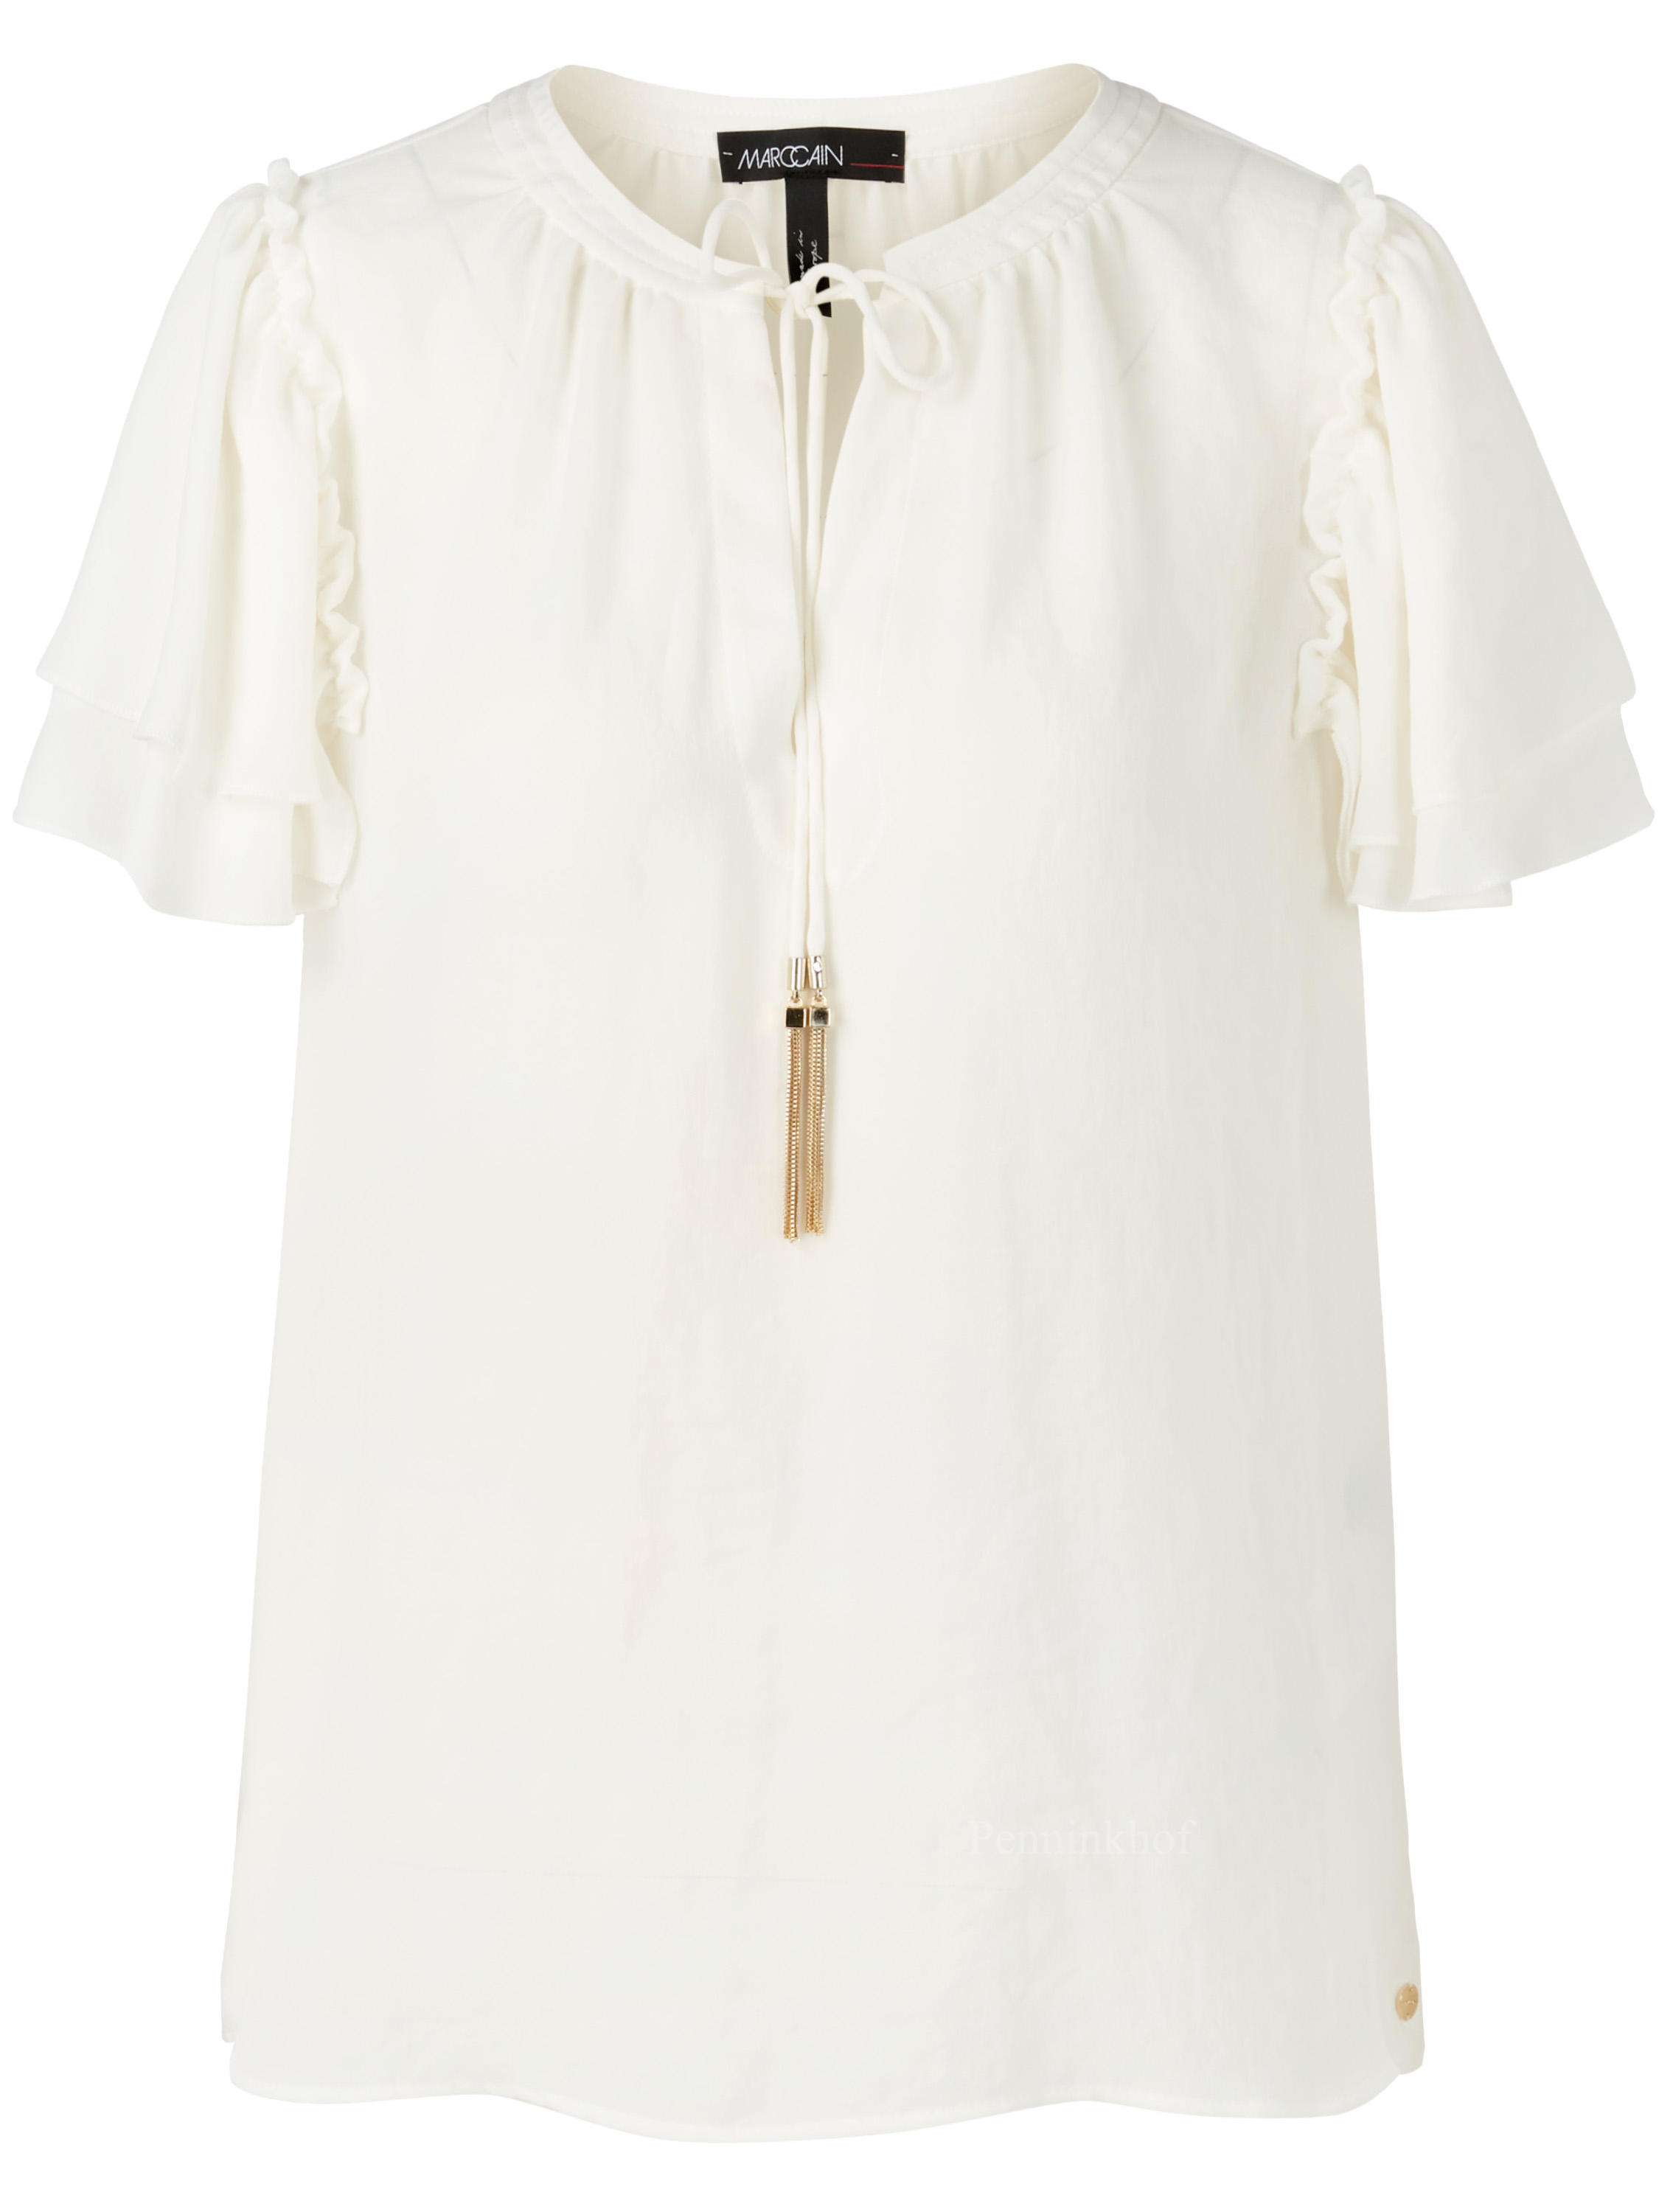 W30 Cain Cream by UC 55.19 blouses White Marc